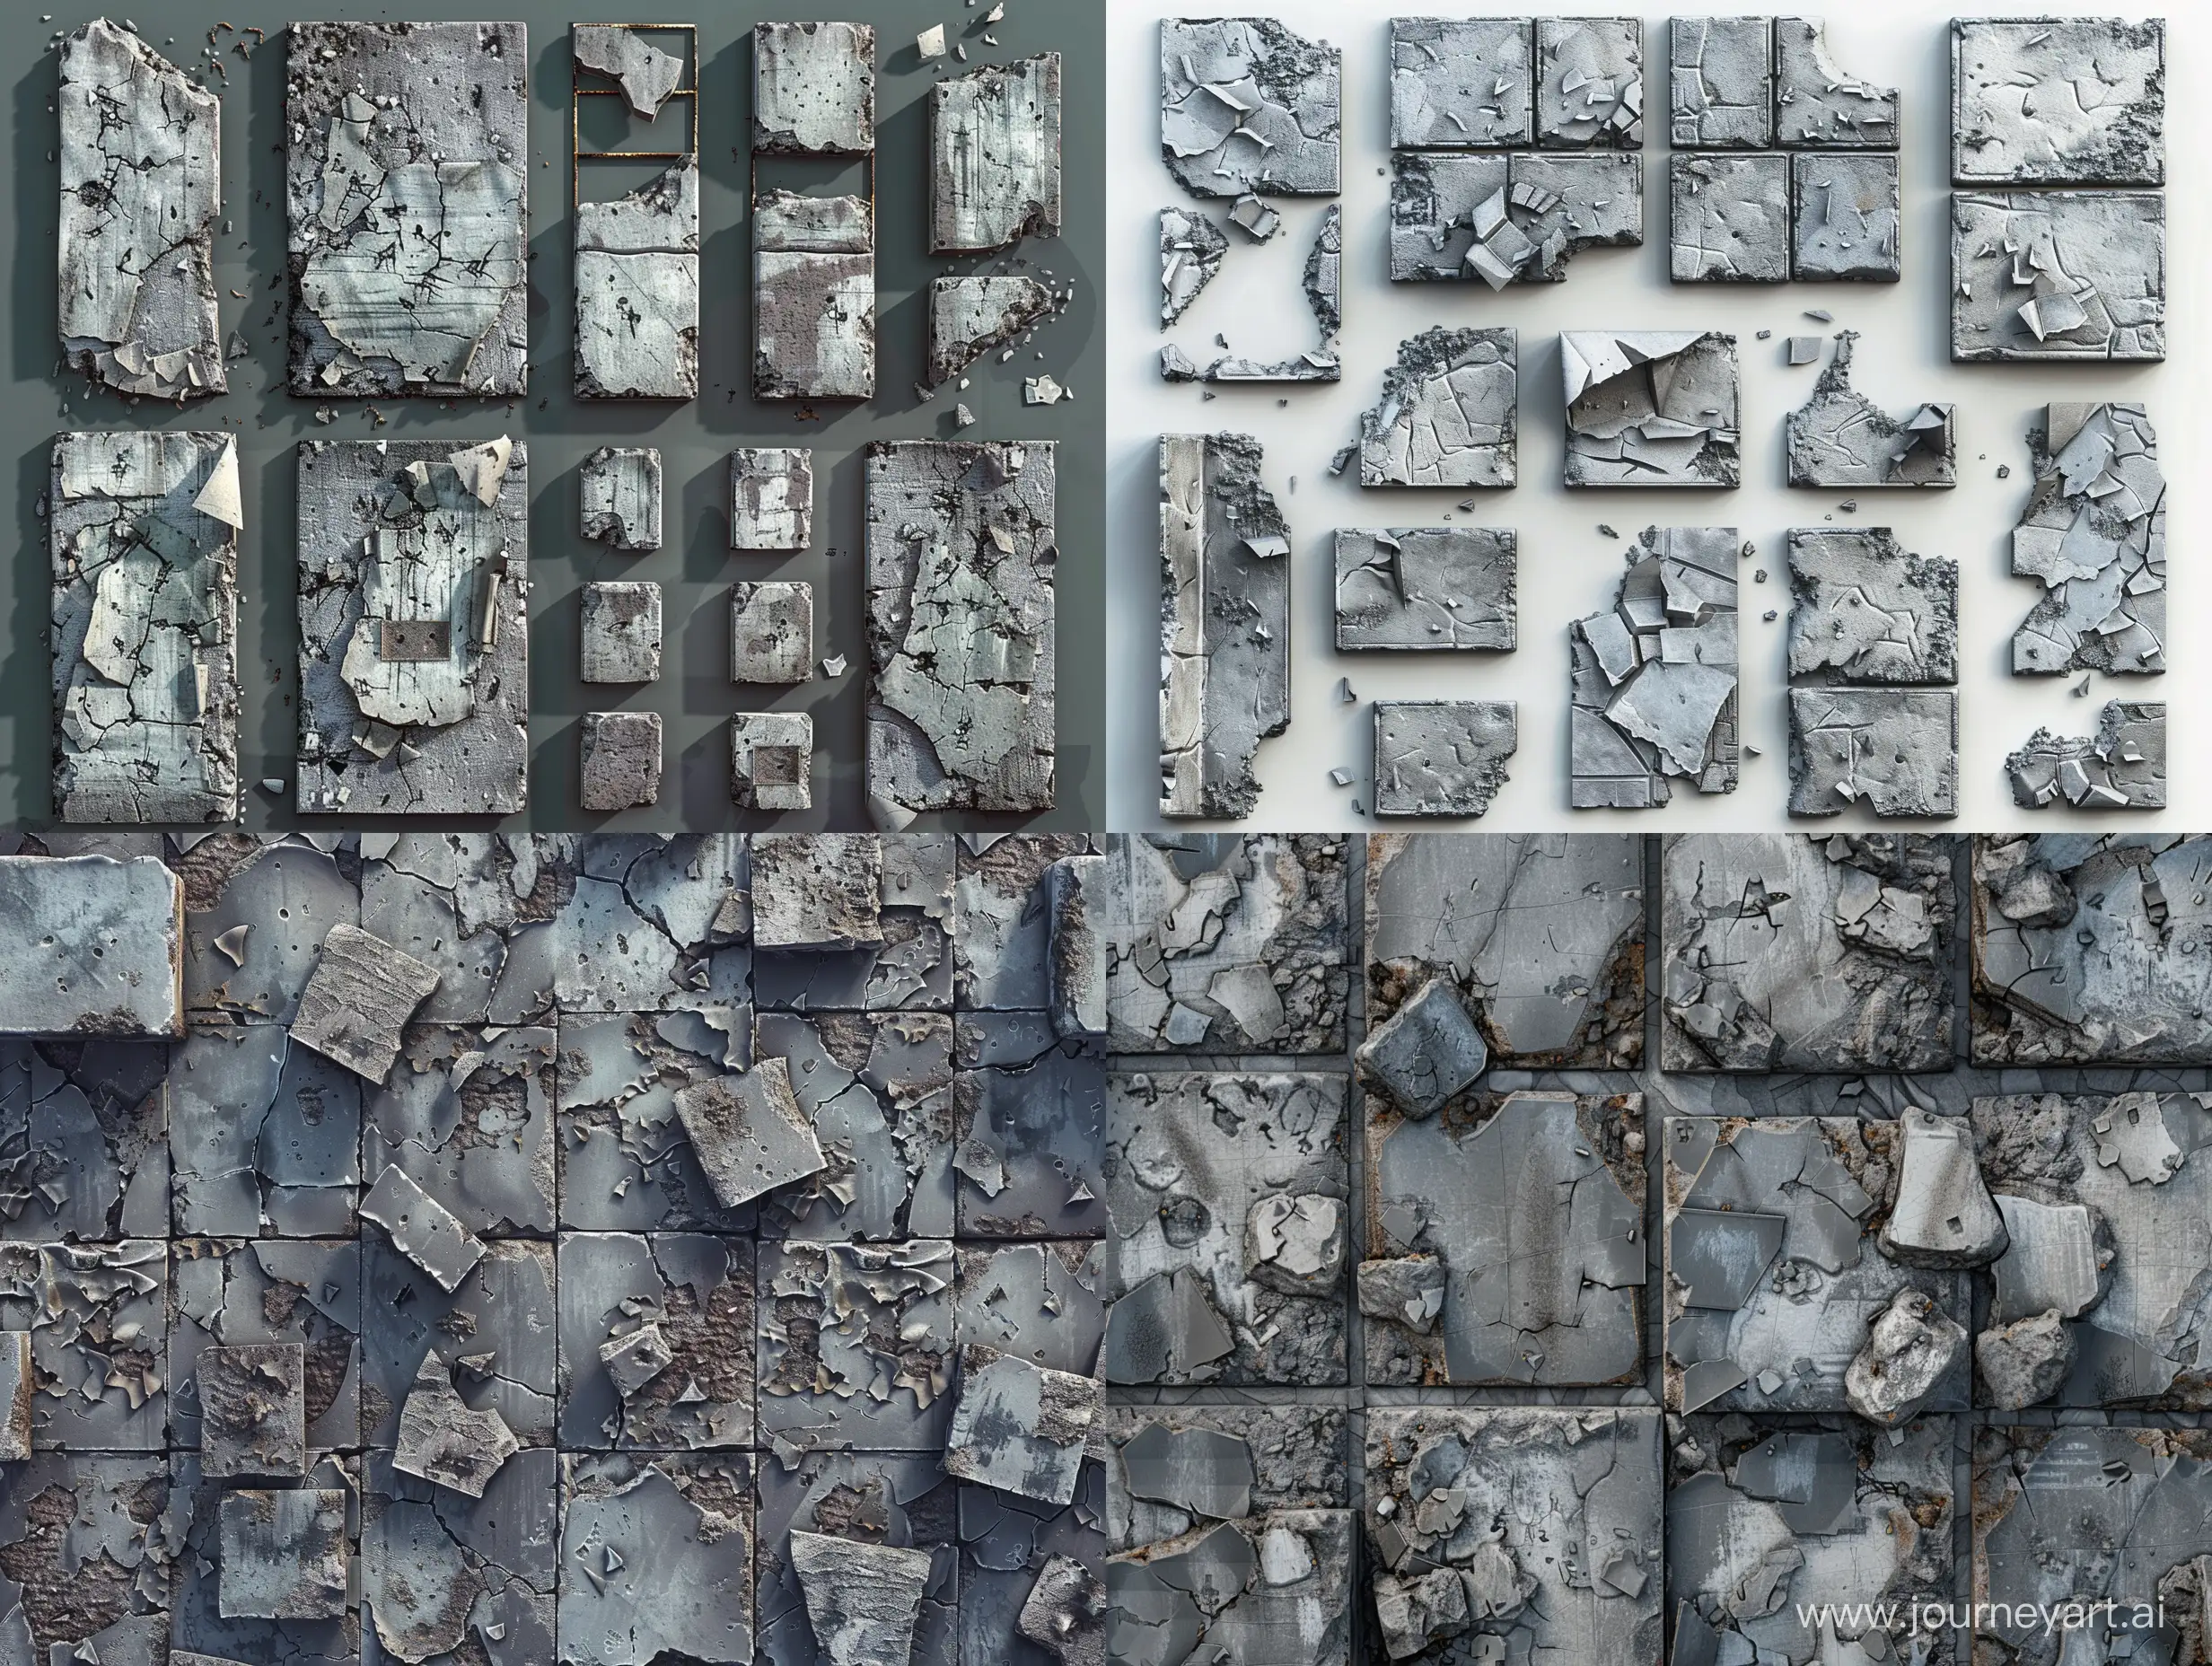 Asset of sprites for 2d platformer. concrete blocks, pieces of ruins, peeling walls. the details are made of iron. A map of sprites. post-apocalypse, brutalism. 8k. photorealism, unreal engine